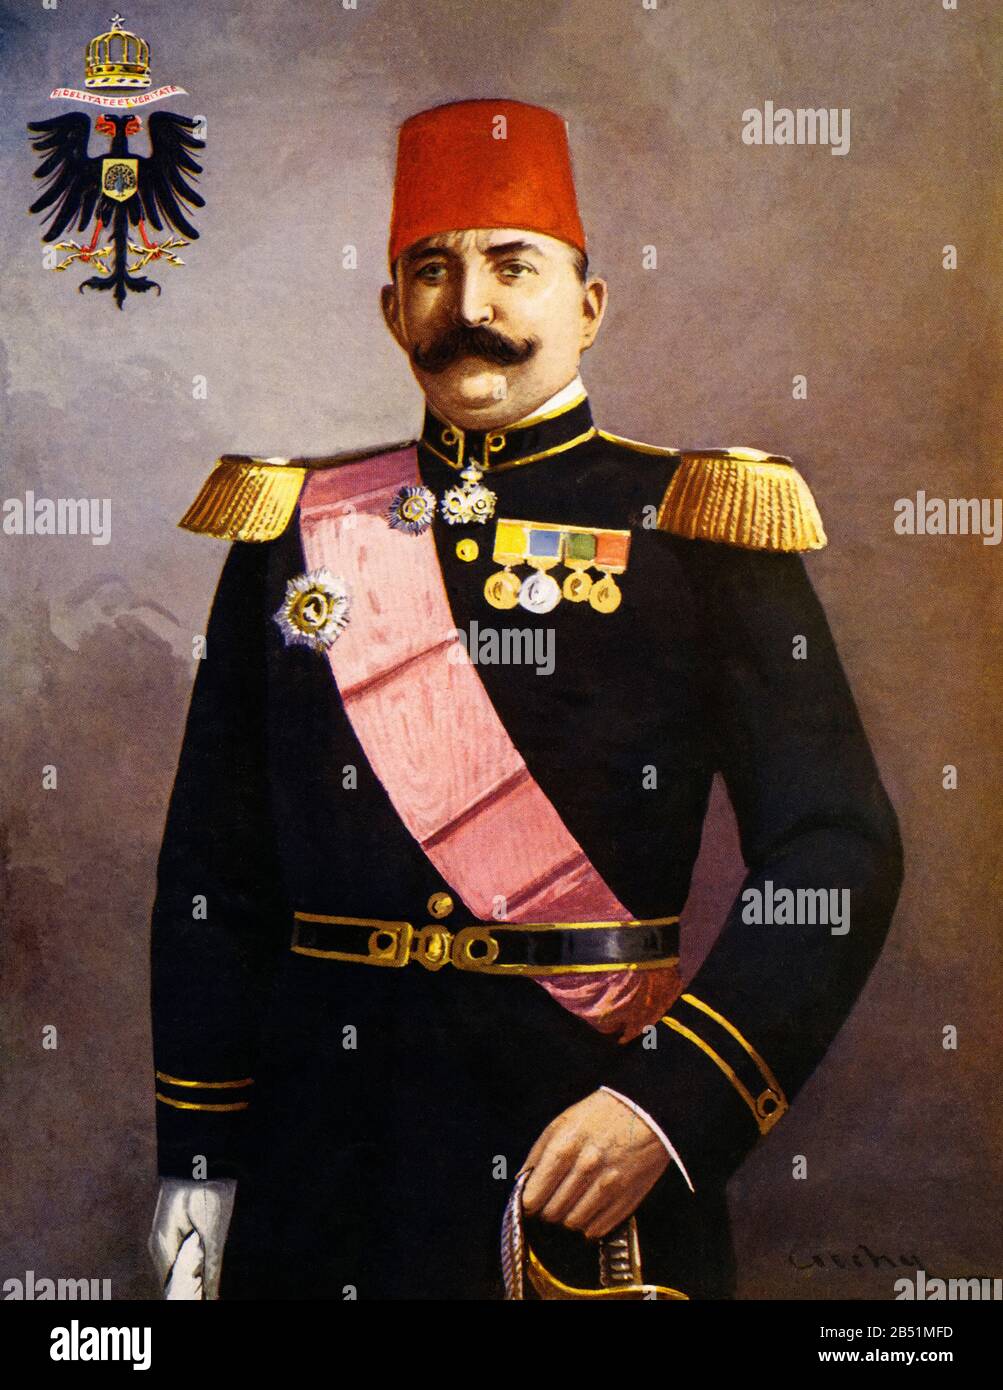 Color portrait of Essad Pasha. Essad Toptani (Tirana 1863 - Paris 1920) was an Albanian political leader. He joined the movement of the Young Turks, c Stock Photo